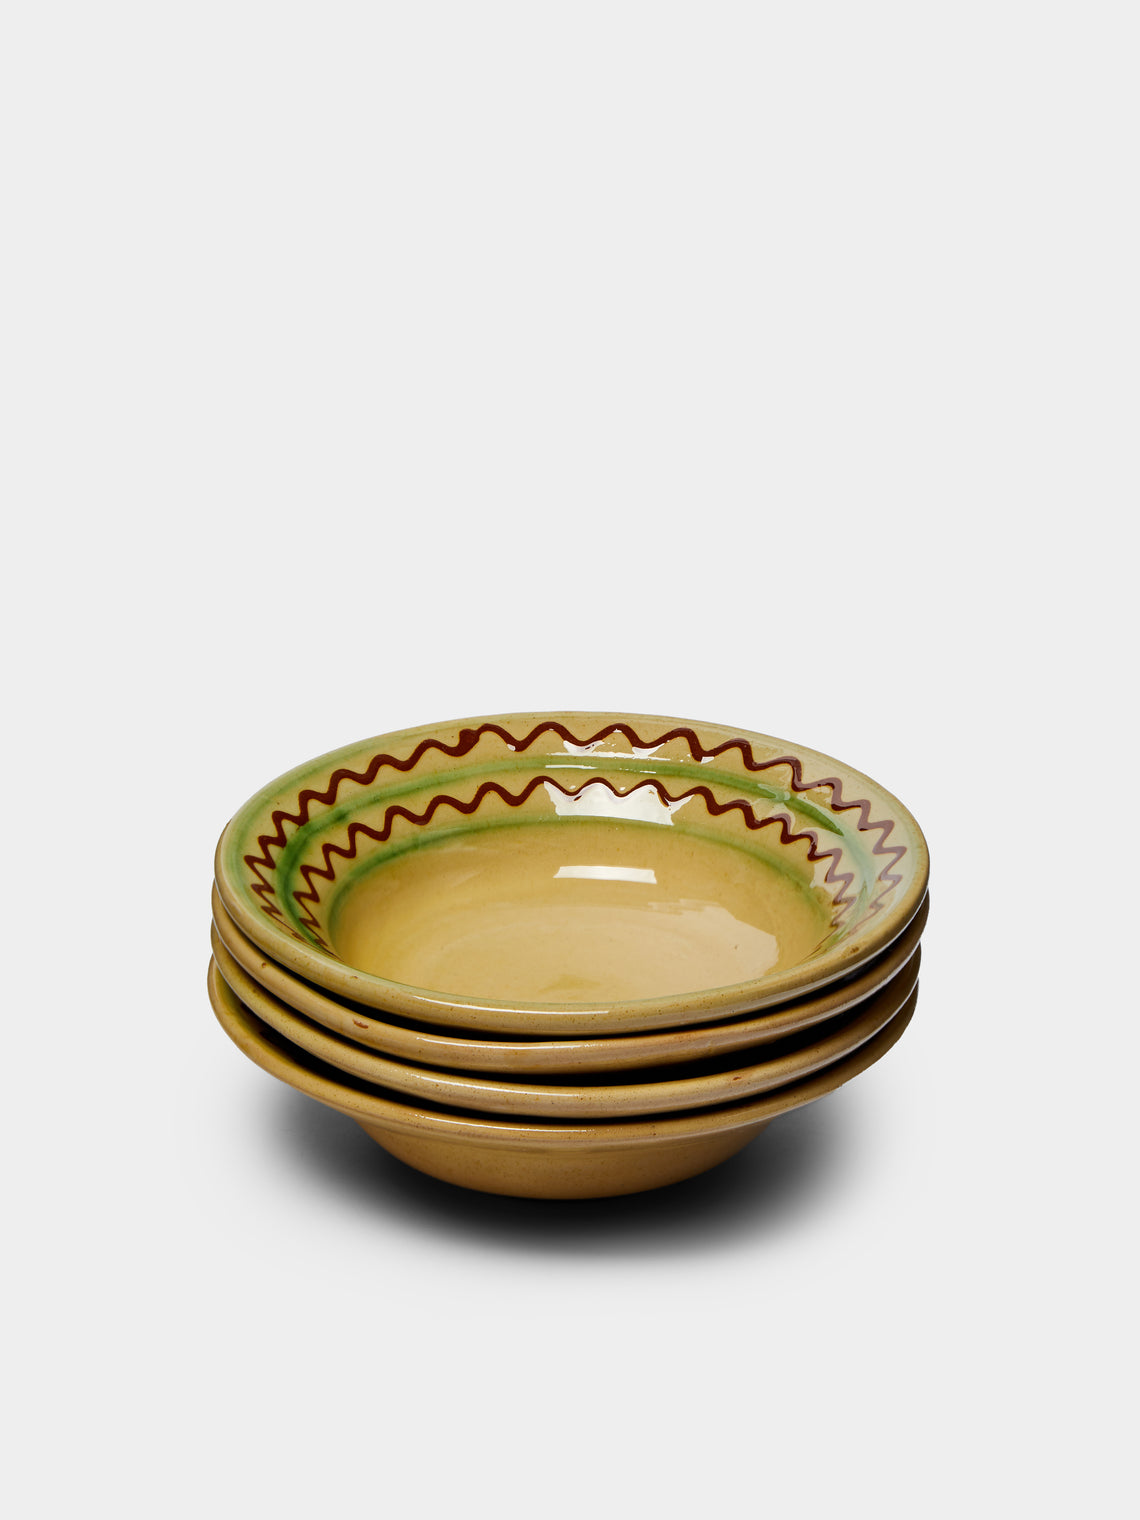 Poterie de Cliousclat - Hand-Painted Slipware Small Bowls (Set of 4) -  - ABASK